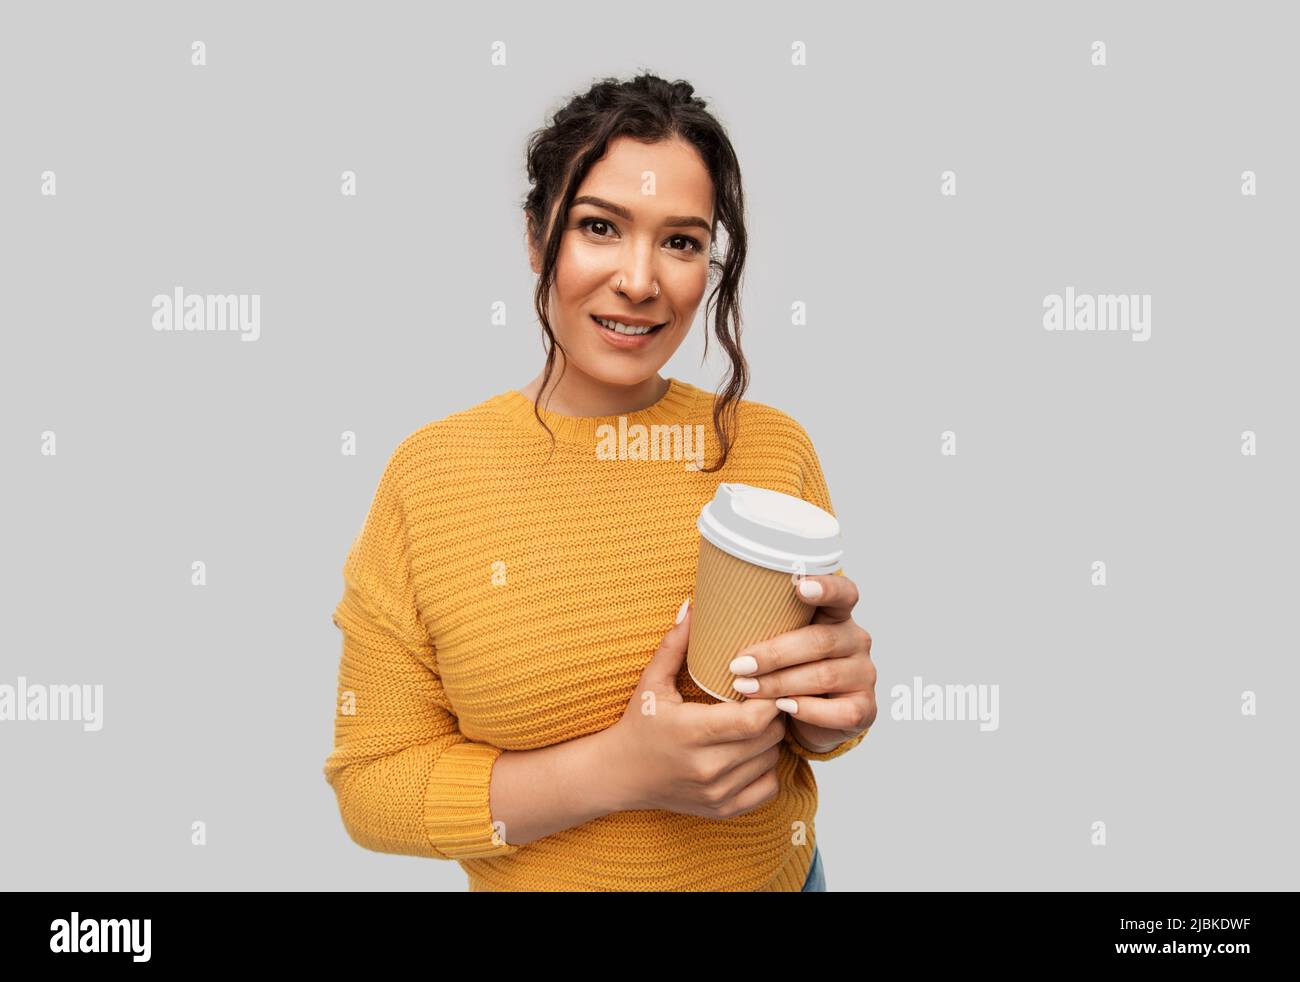 smiling woman with pierced nose holding coffee cup Stock Photo